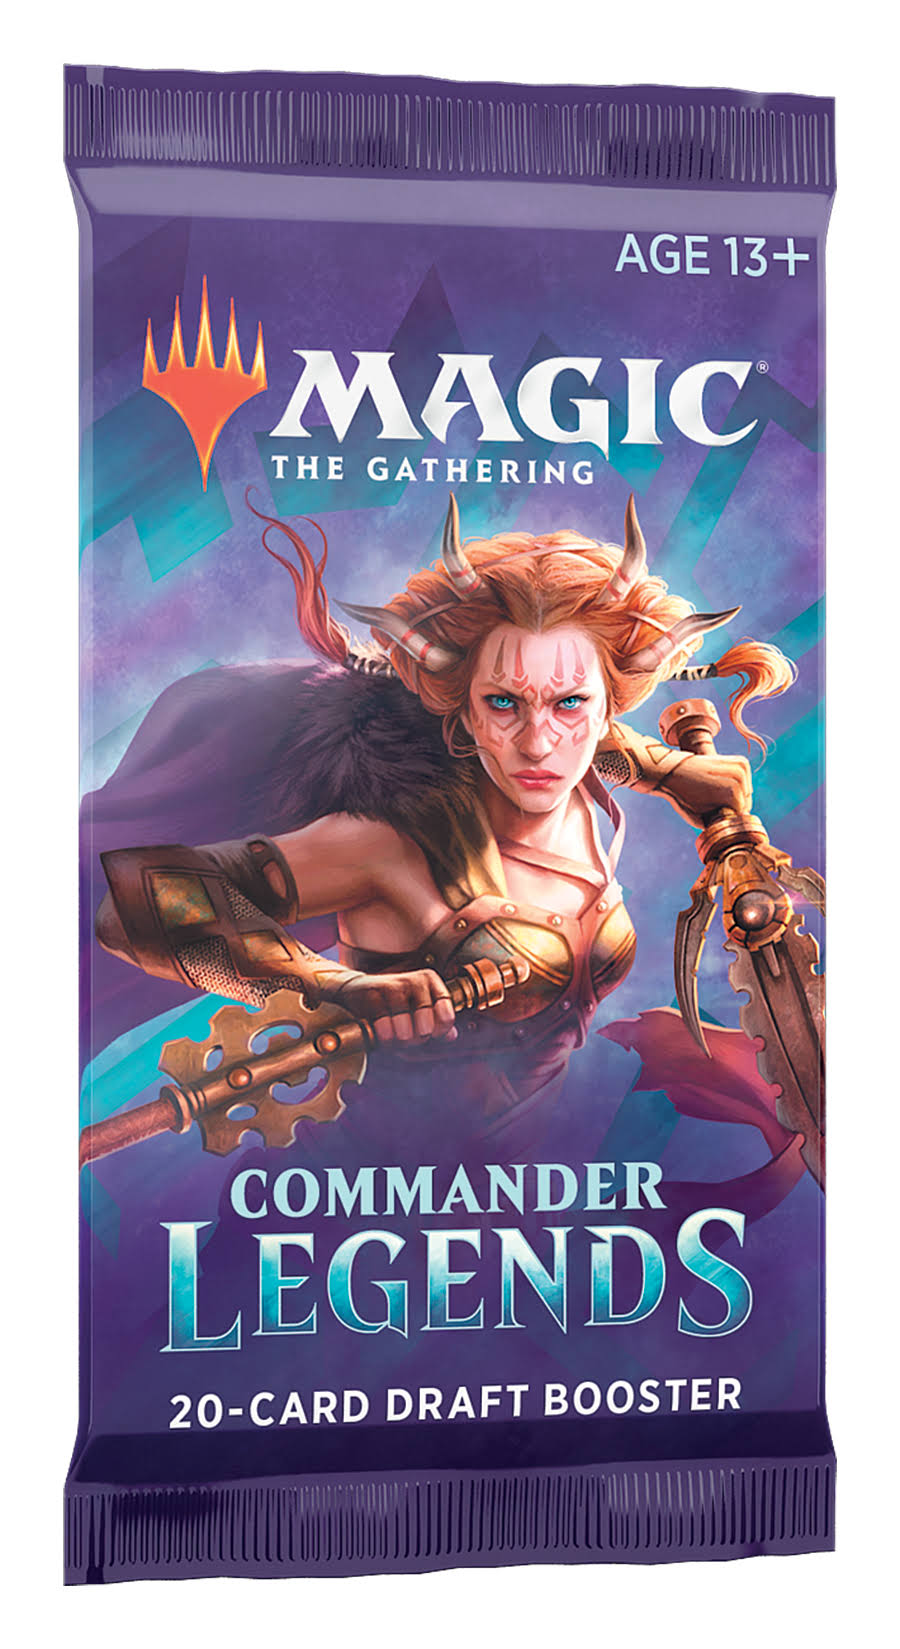 Magic The Gathering Commander Legends Draft Booster